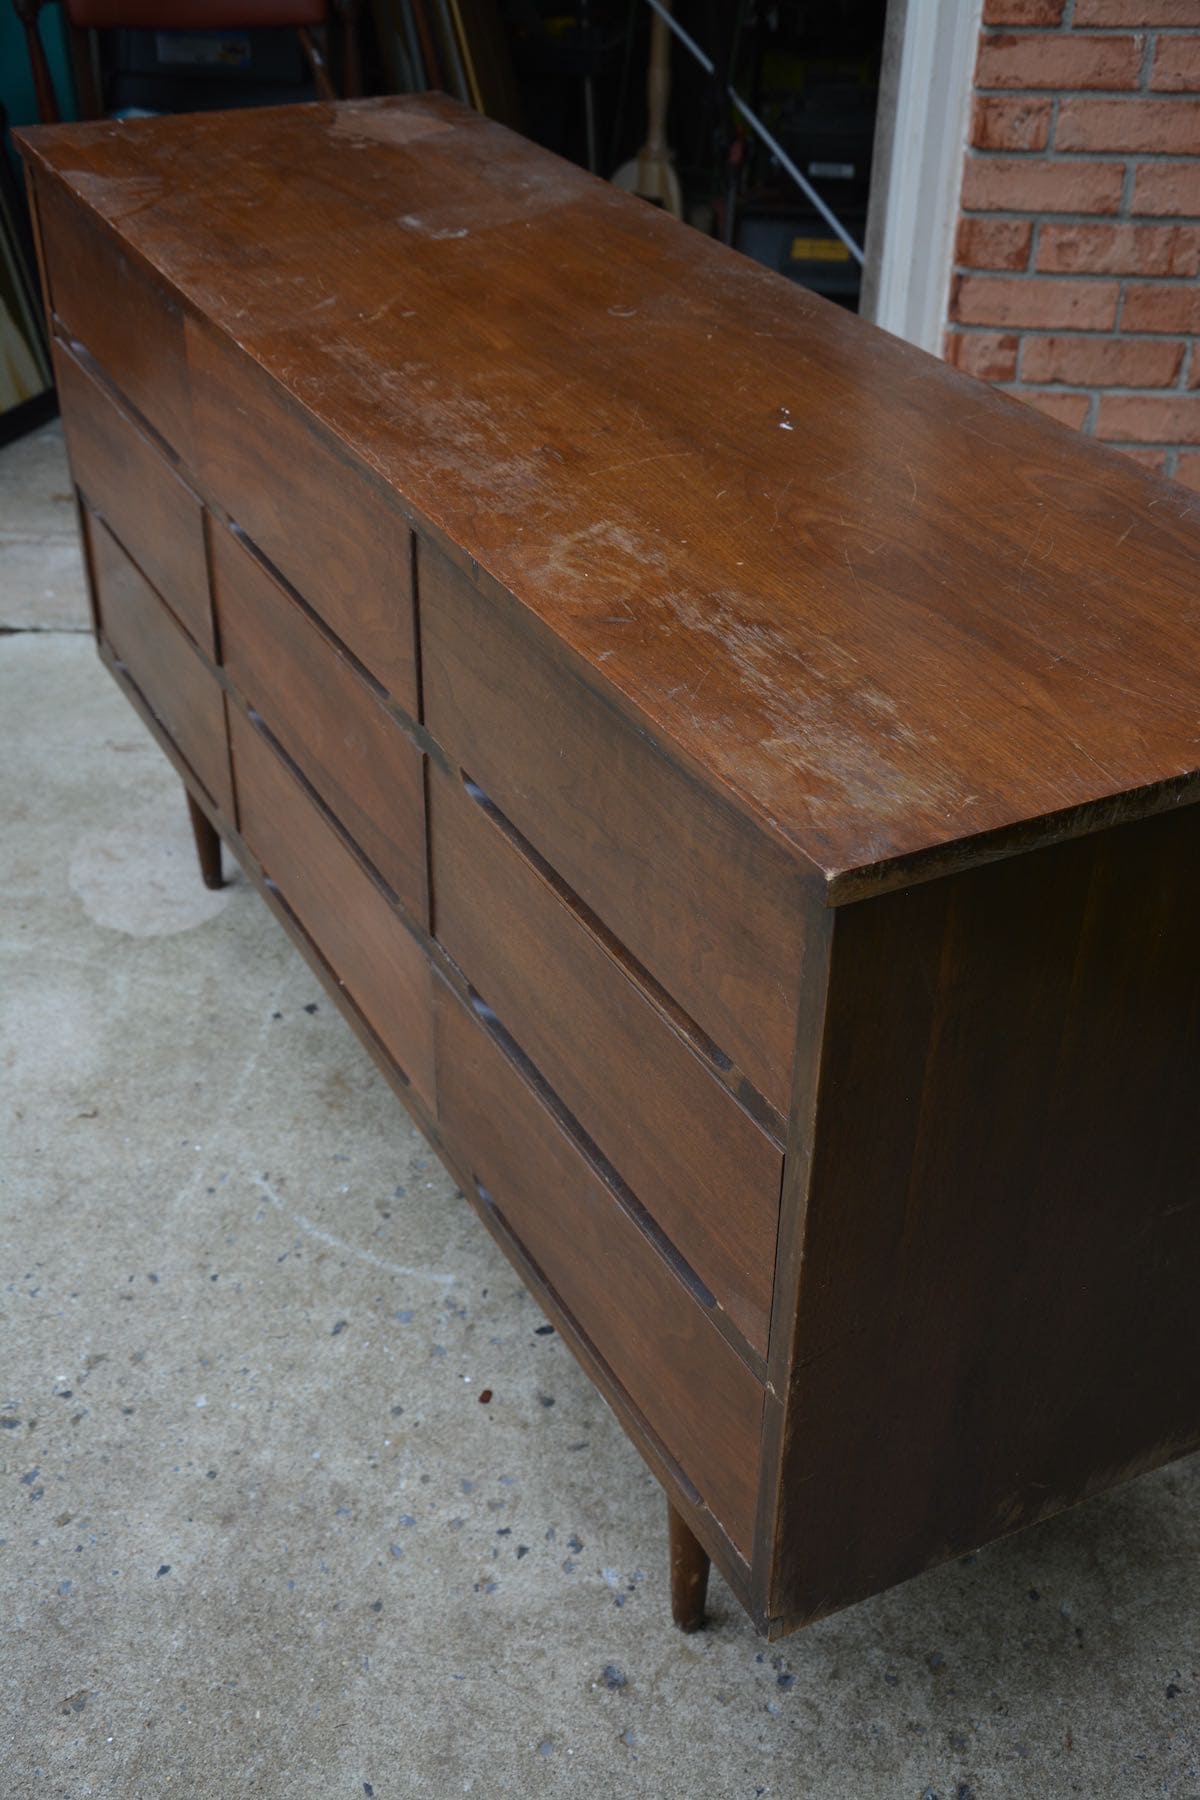 Mid-Century Modern Dresser Makeover Stripped and Refinished - BEFORE PICTURE. - Thrift Diving